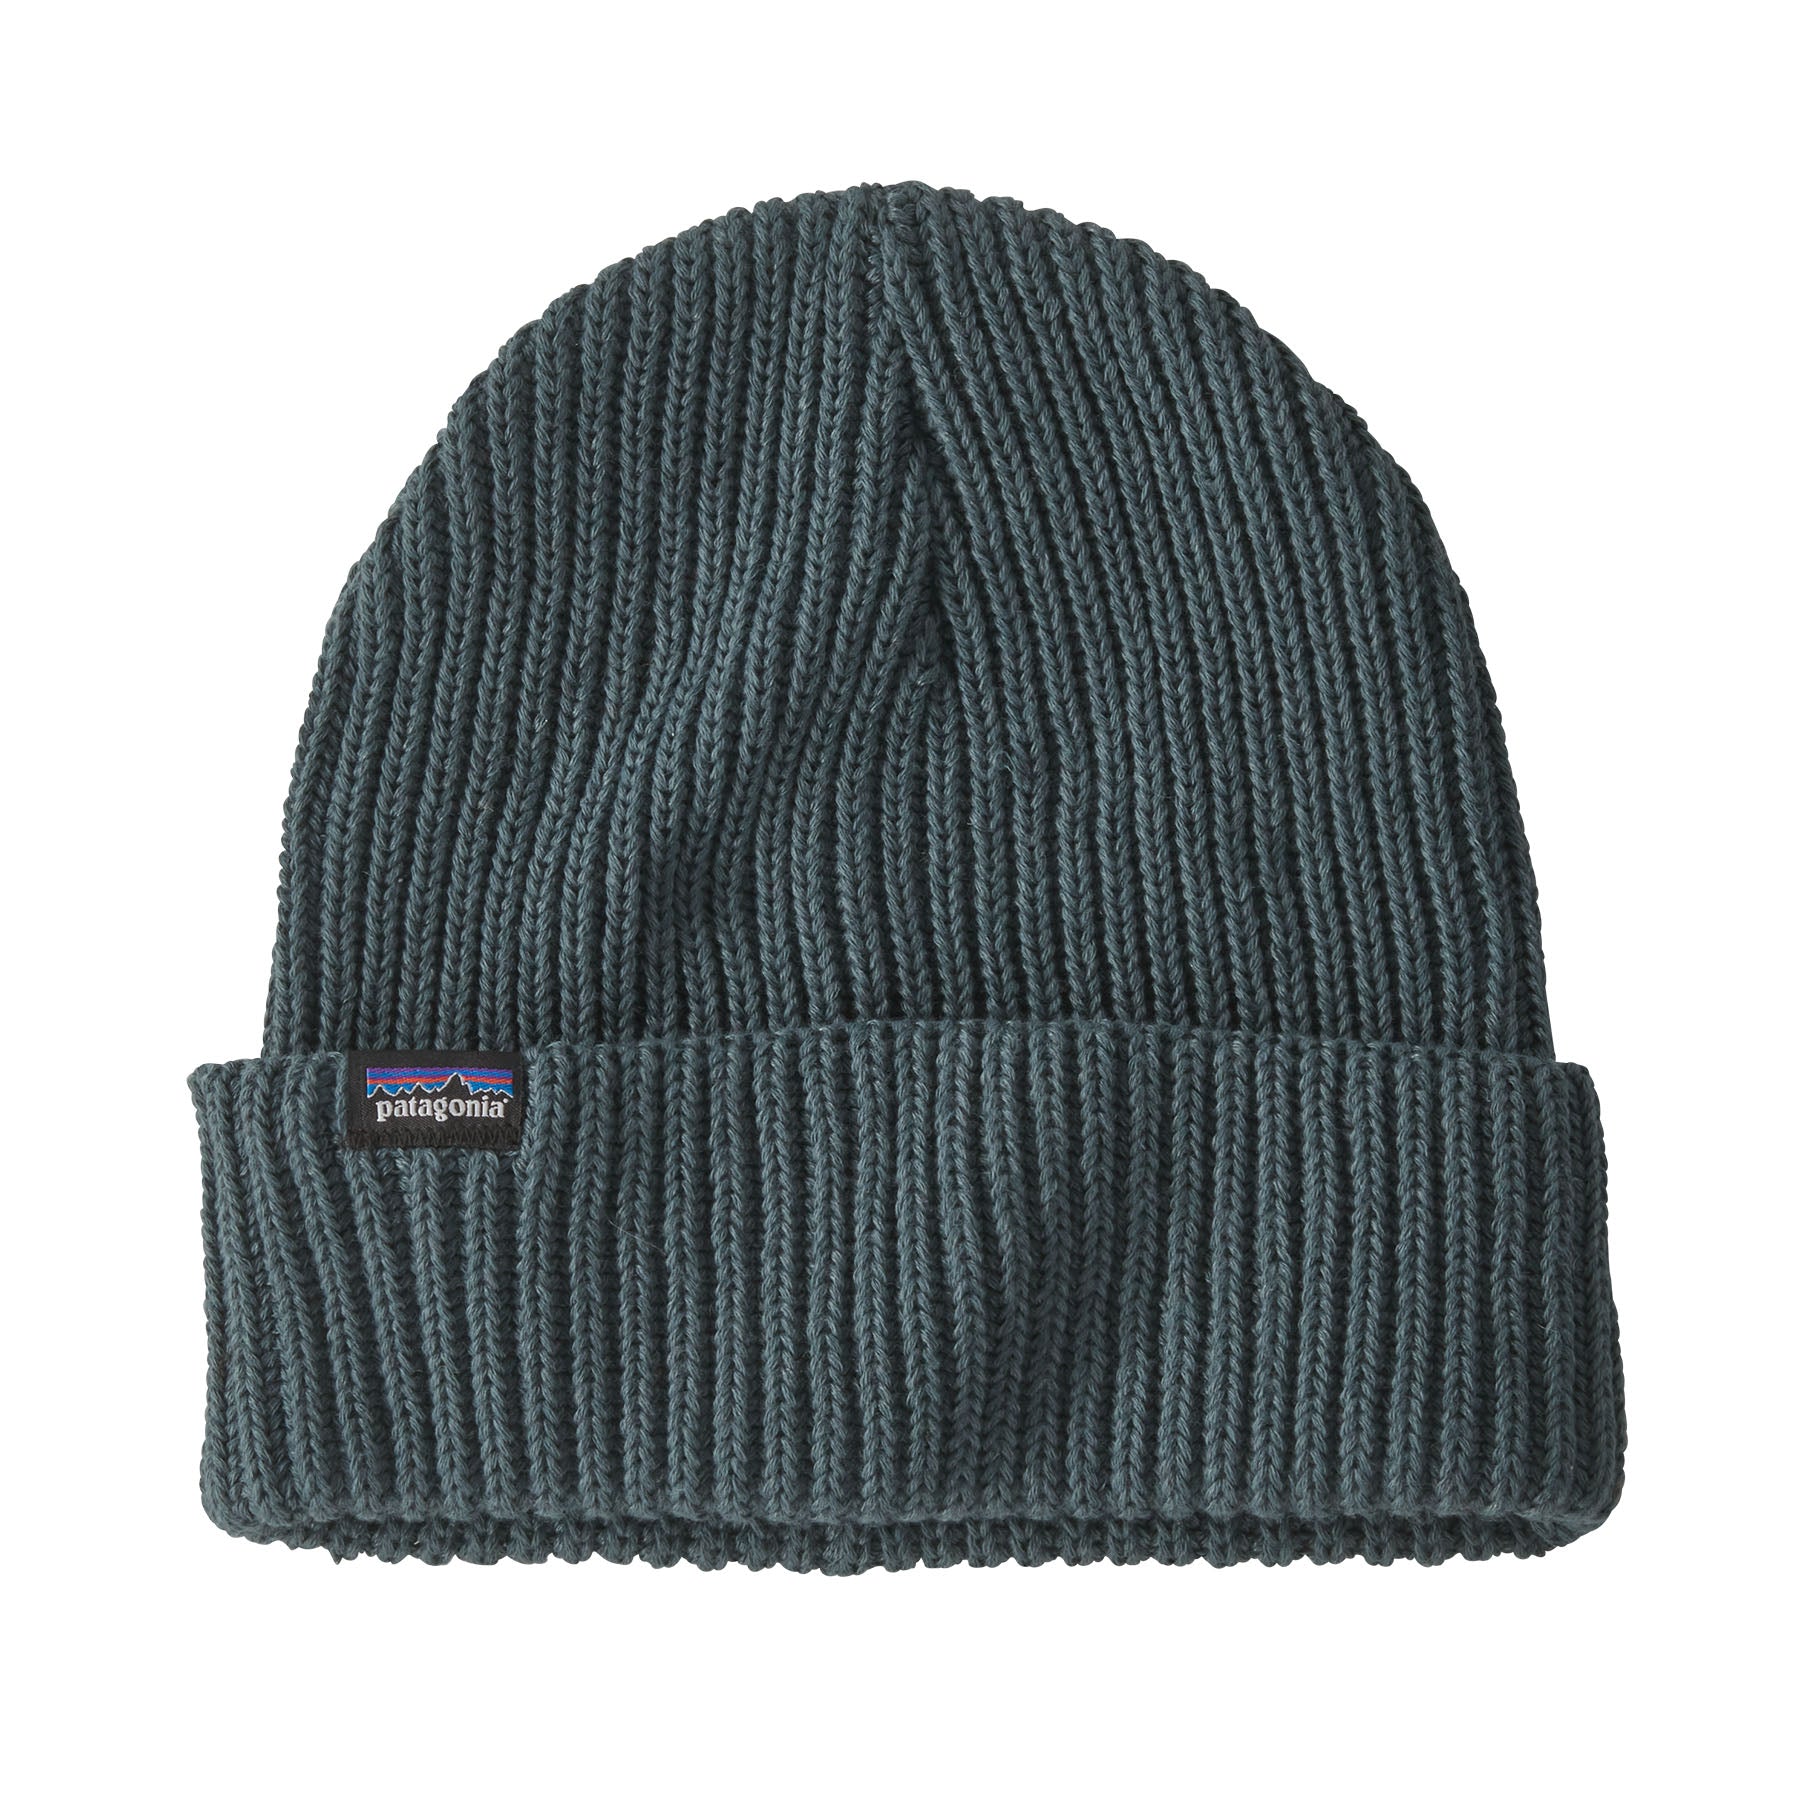 — Fishermans Adventure Rolled Native Outfitters Summit Beanie